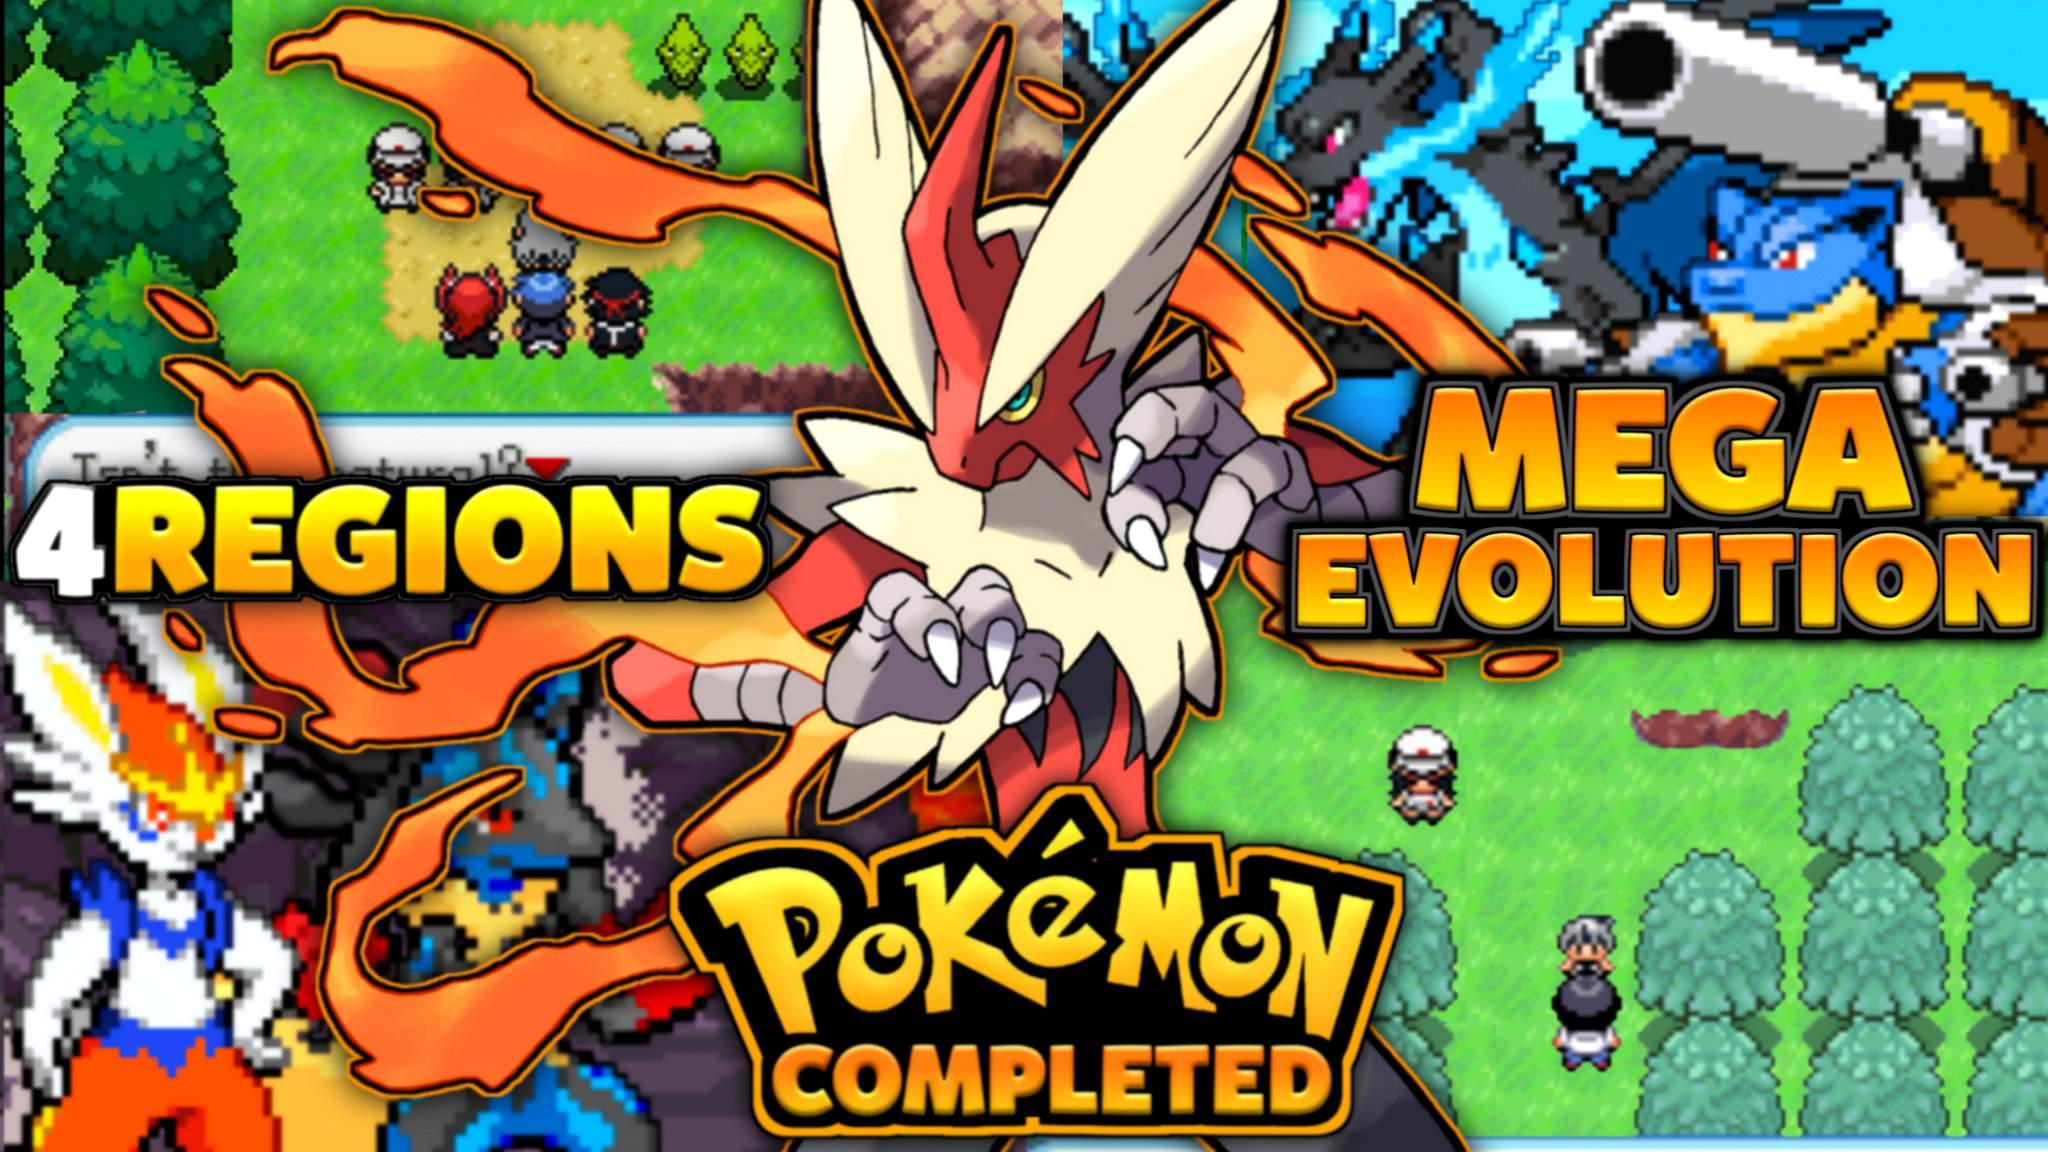 [NEW UPDATE] Completed Pokemon GBA ROM Hack 2022 With Mega Evolution, 4